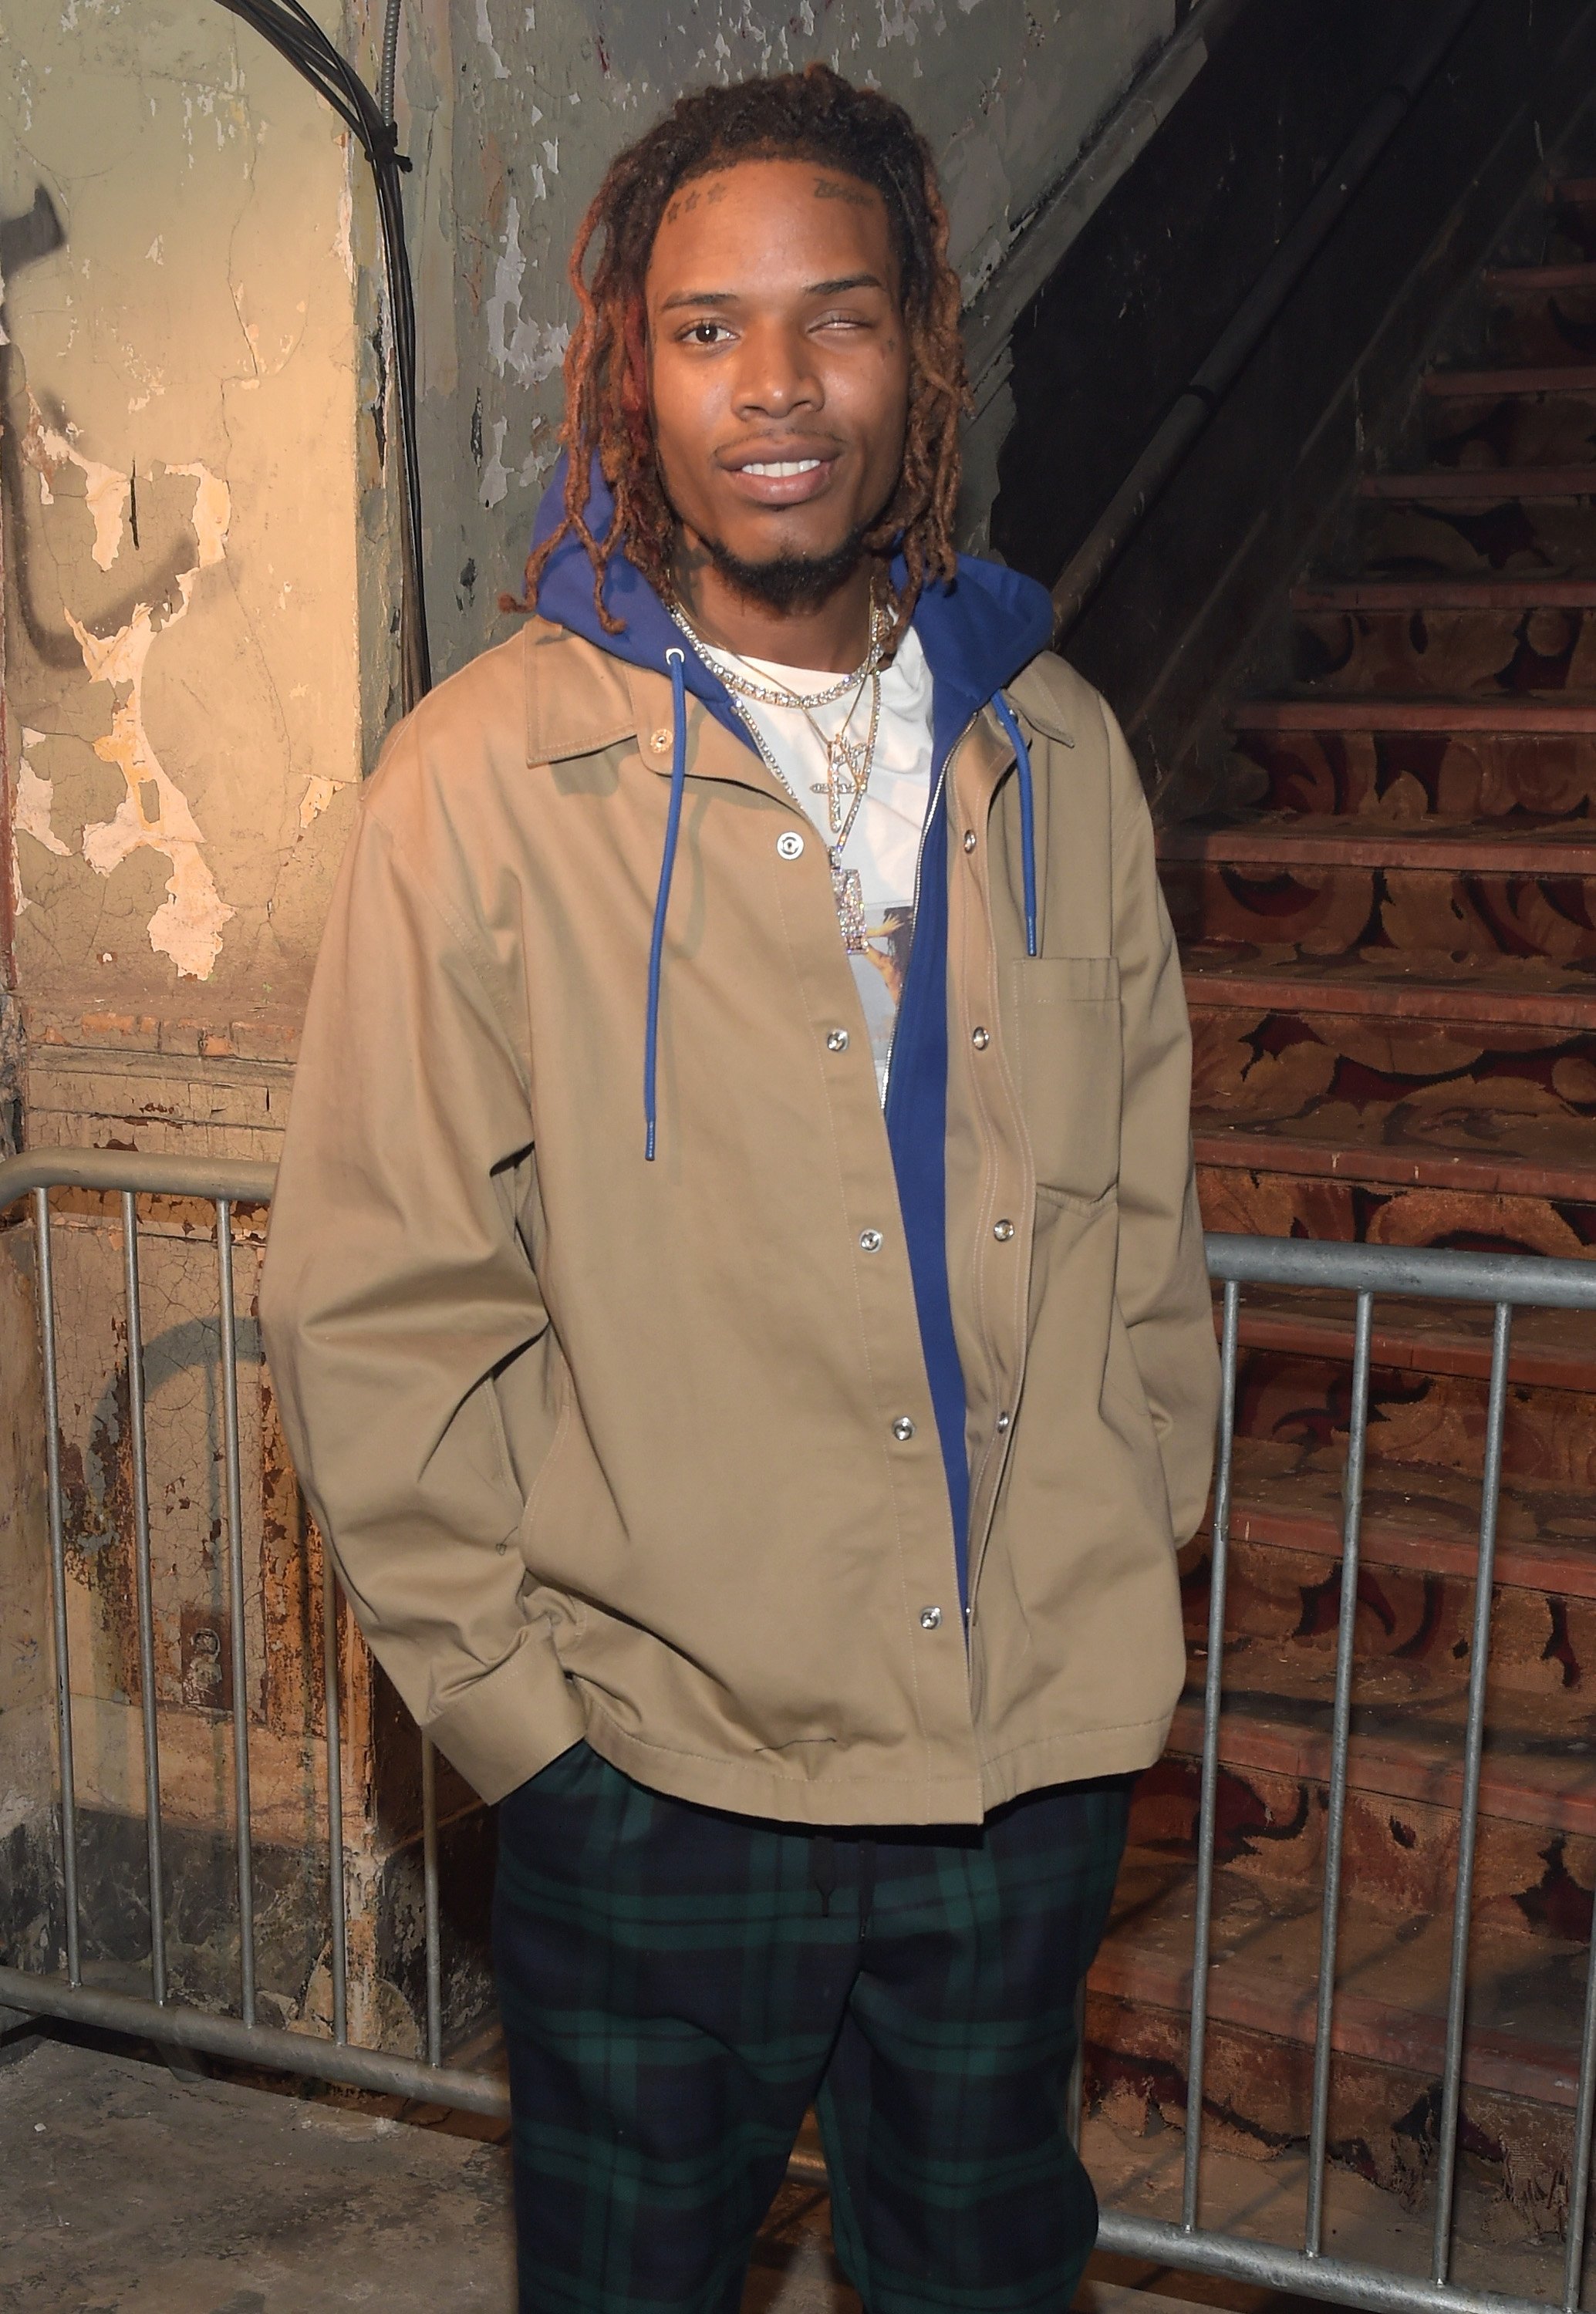 Rapper Fetty Wap at New York Fashion Week in February 2017. | Photo: Getty Images